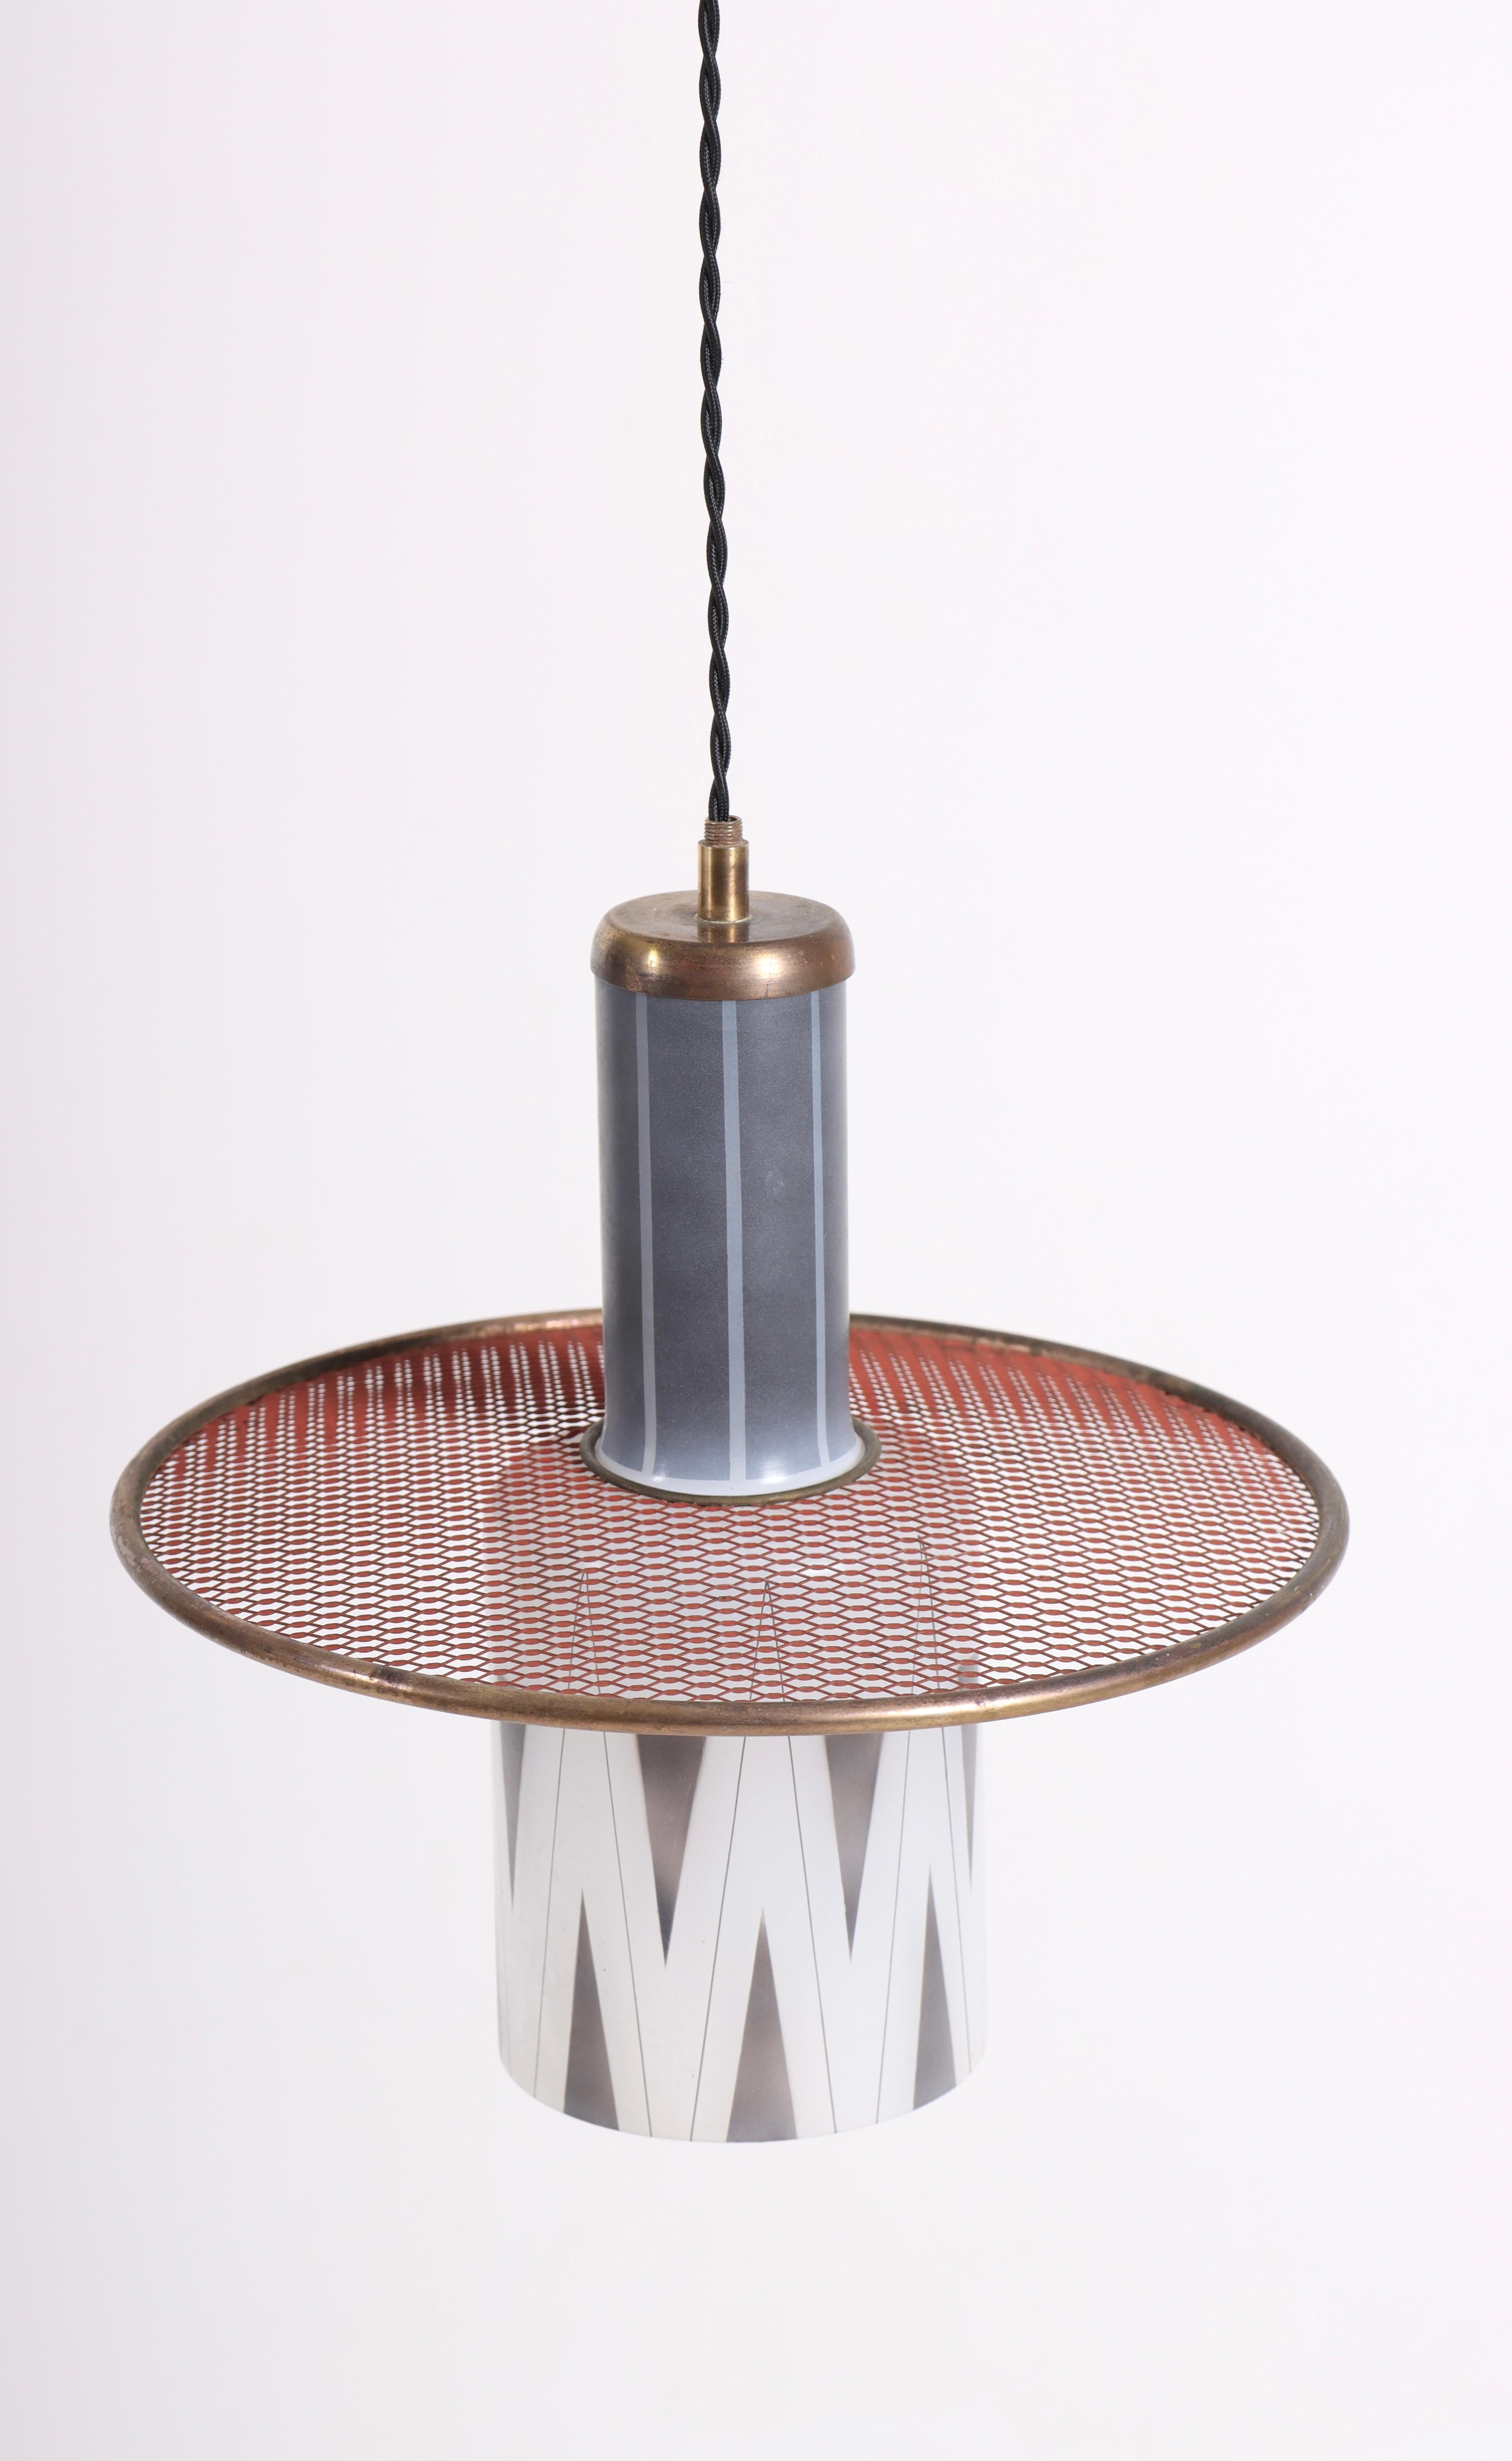 Rare ceiling lamp in glass and brass, designed and made in Denmark 1950s. Great original condition.